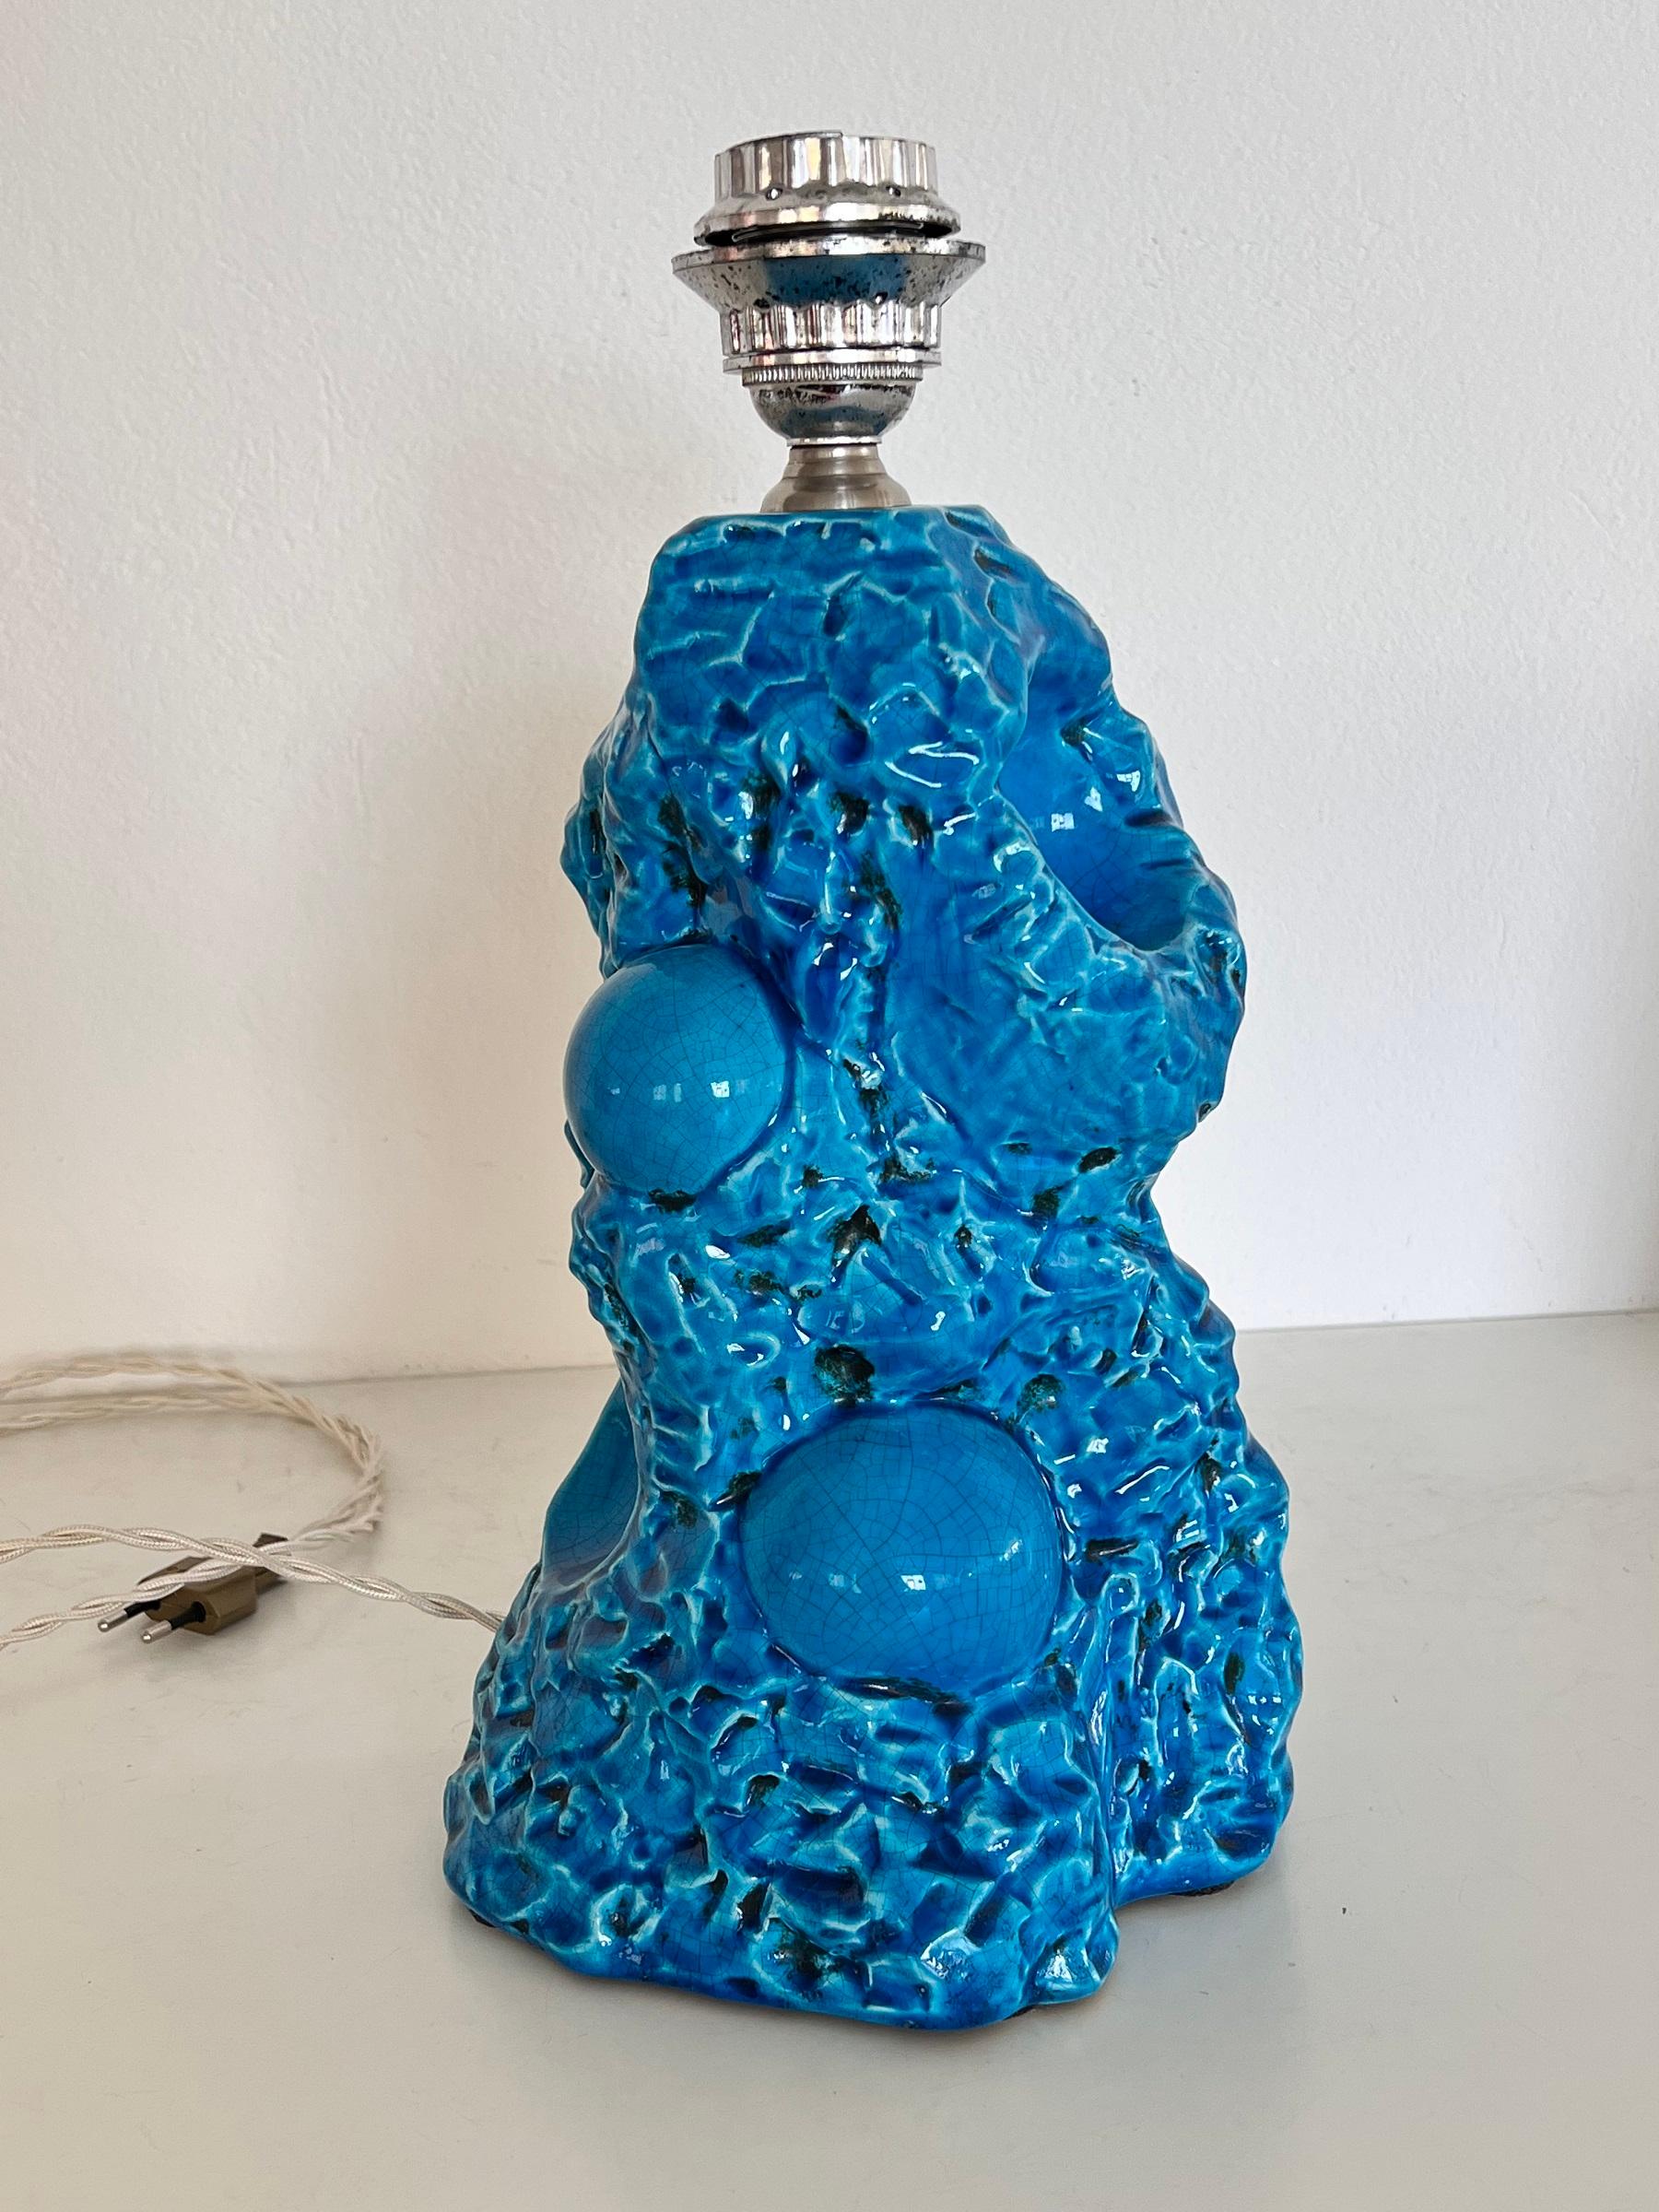 Special ceramic table lamp handmade in Italy by Zaccagnini in the 1970s.
The base of the lamp has a particularly bright blue color and a special appearance, reminiscent of lava stone.
Typical of the pop 70-80s.
The cable has been renewed with a